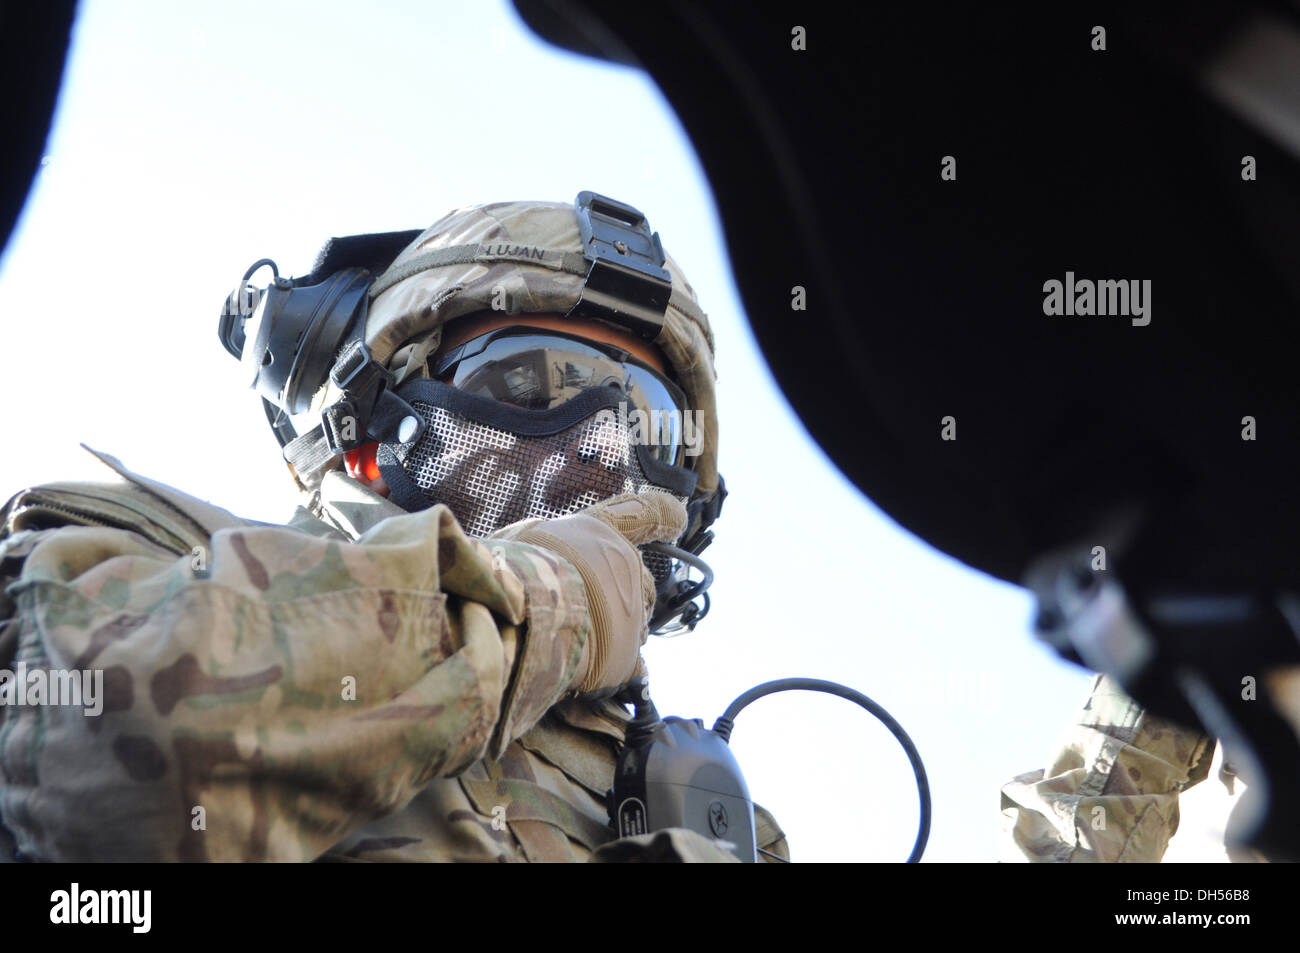 MASKED MASTER -- Spc. Justin E. Lujan, a gunner with Headquarters Company, 1st Battalion, 294th Infantry Regiment, Guam Army National Guard, checks his microphone while standing on a gunner's turret late October during a mission to Camp Eggers, Kabul, Afg Stock Photo